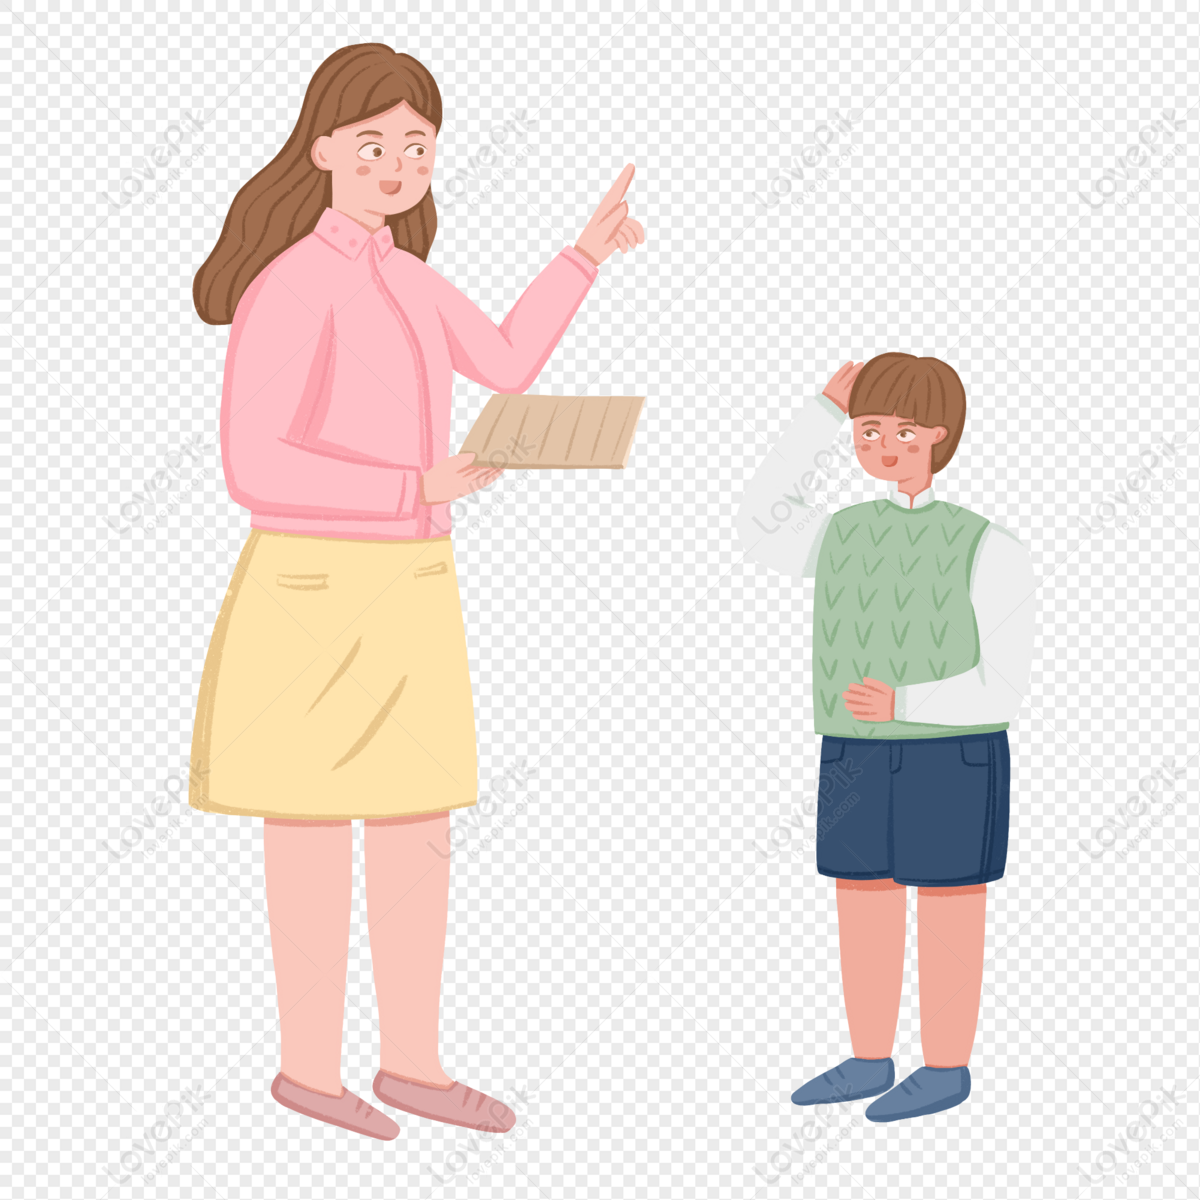 polite people clipart for powerpoint